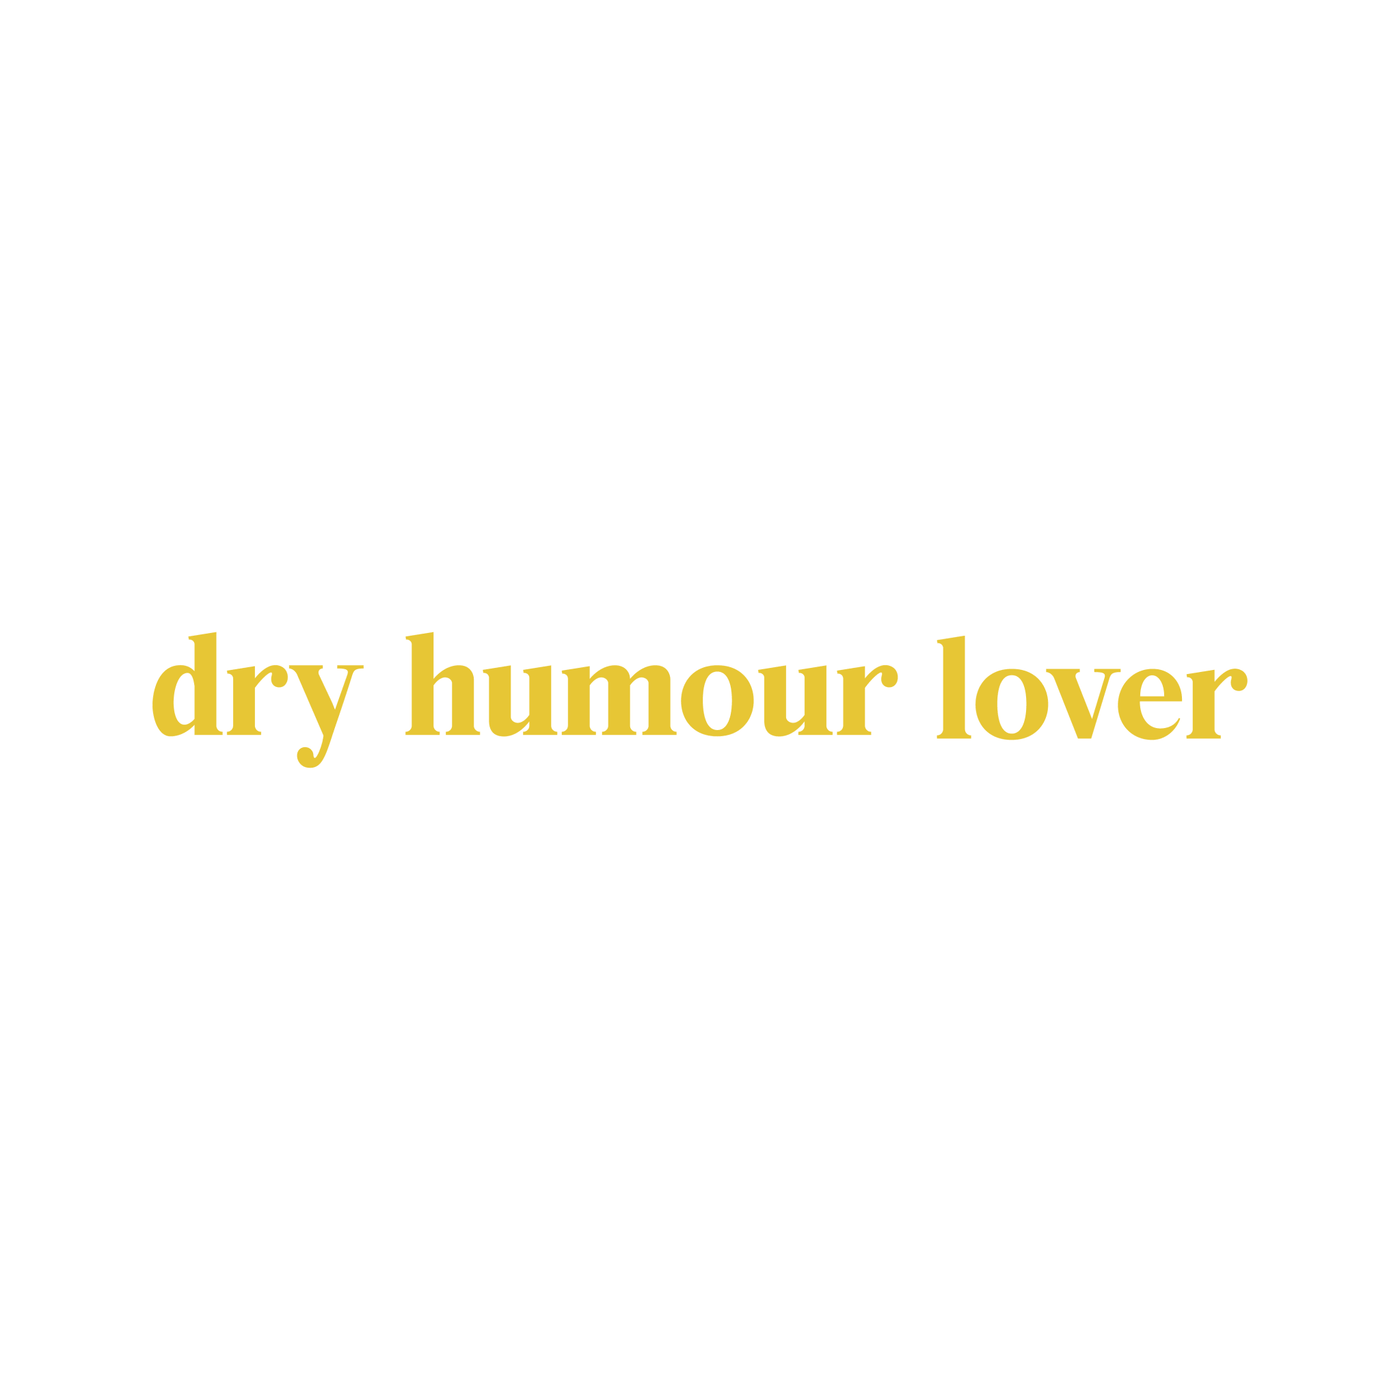 GIFTS FOR THE DRY HUMOUR LOVER - Pretty by Her